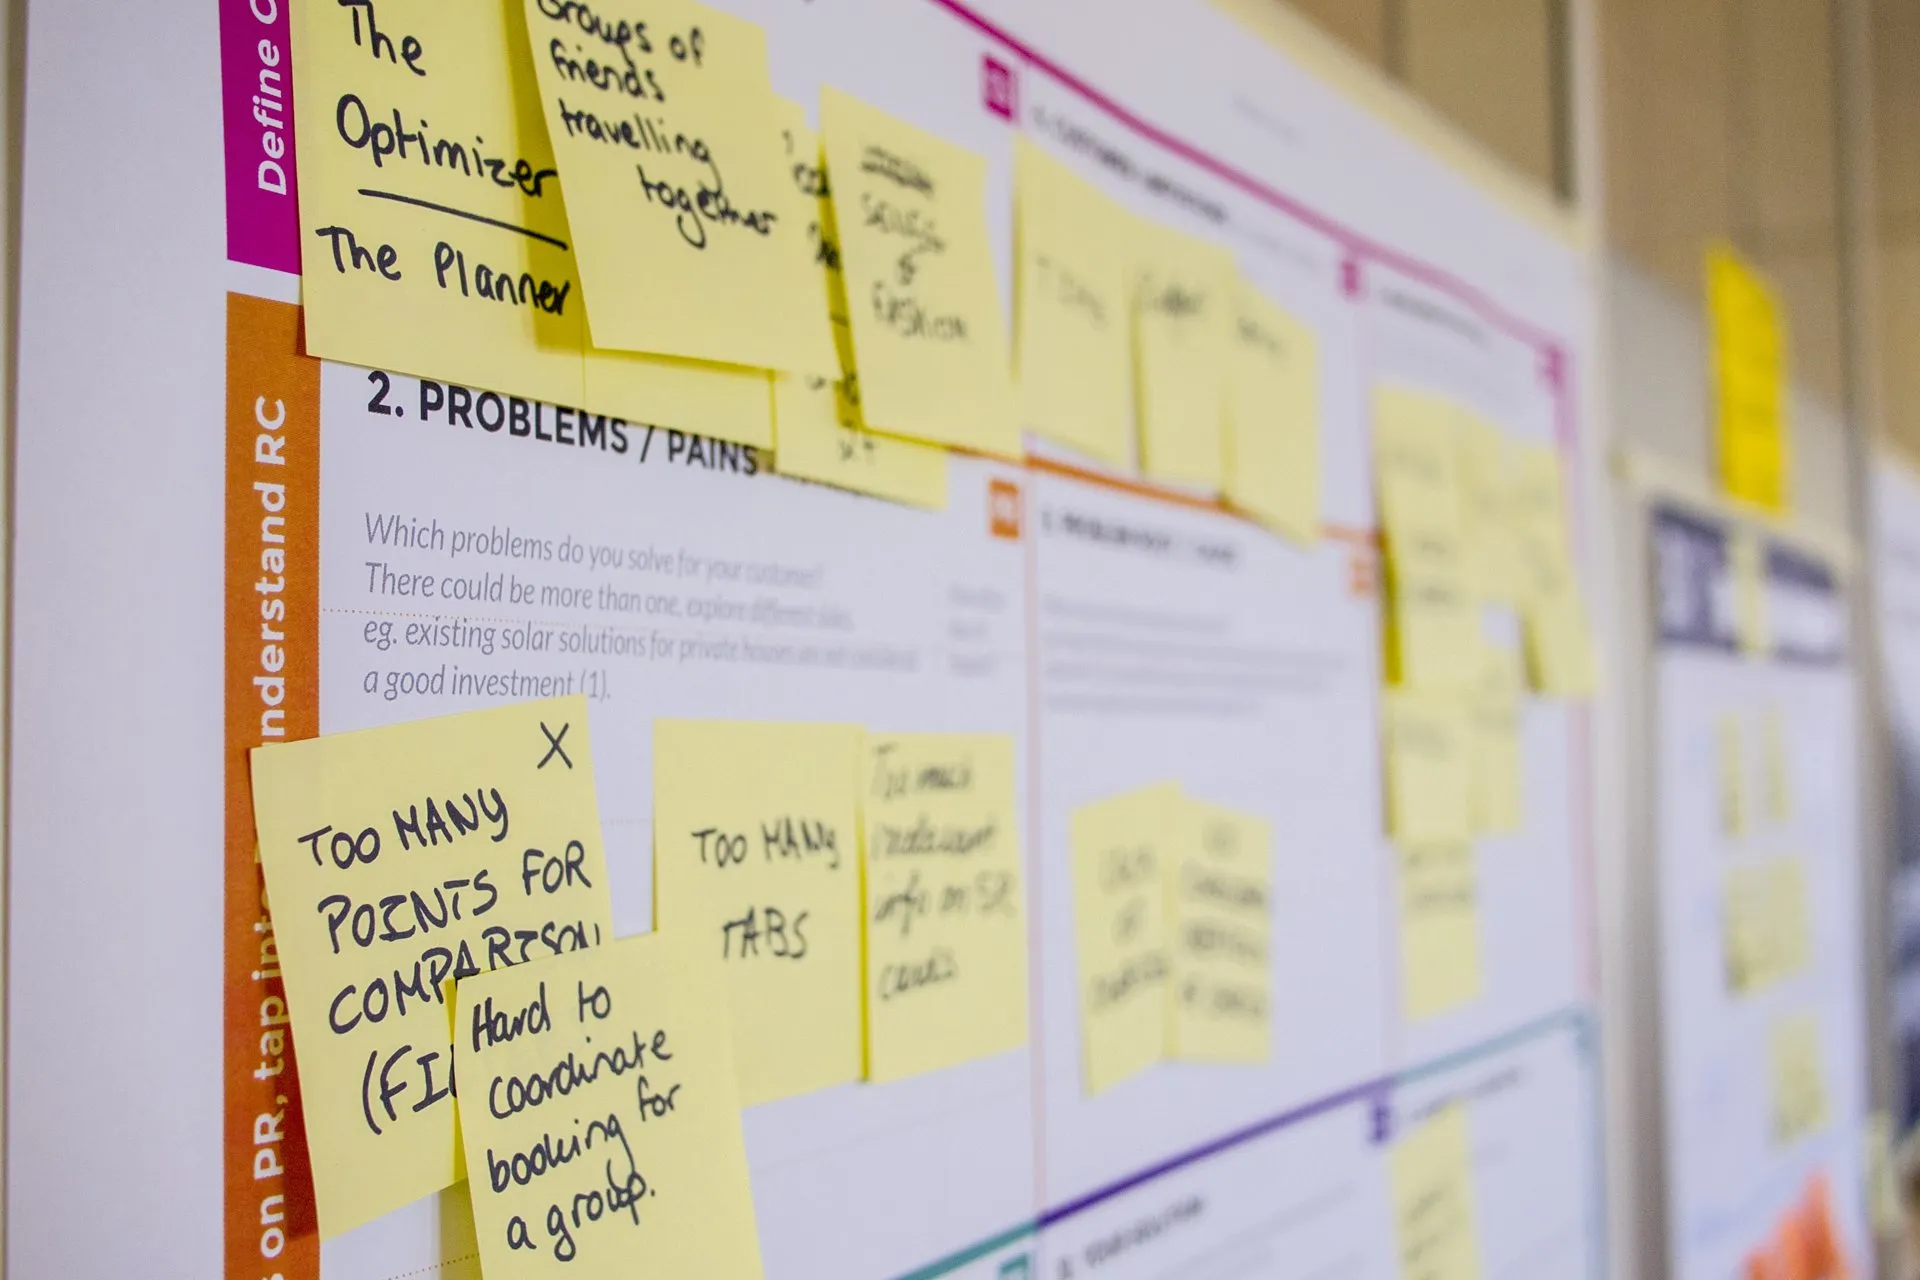 Project board with stickie notes affixed - Photo by Daria Nepriakhina @epicantus on Unsplash